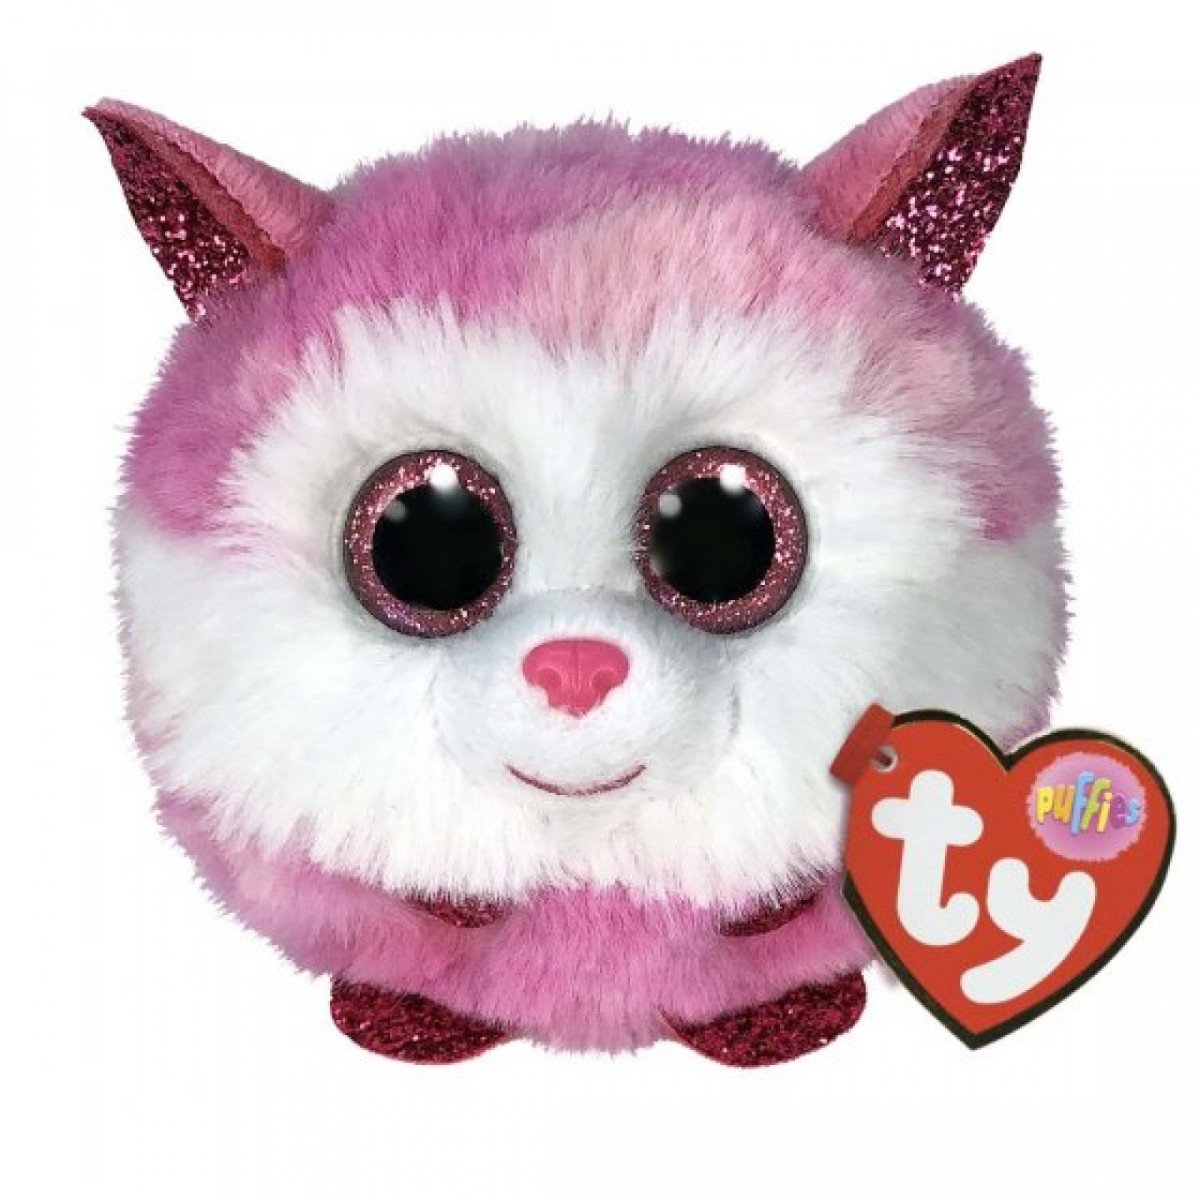 TY Puffies Princess the Pink Husky Plush - Bright Star Toys